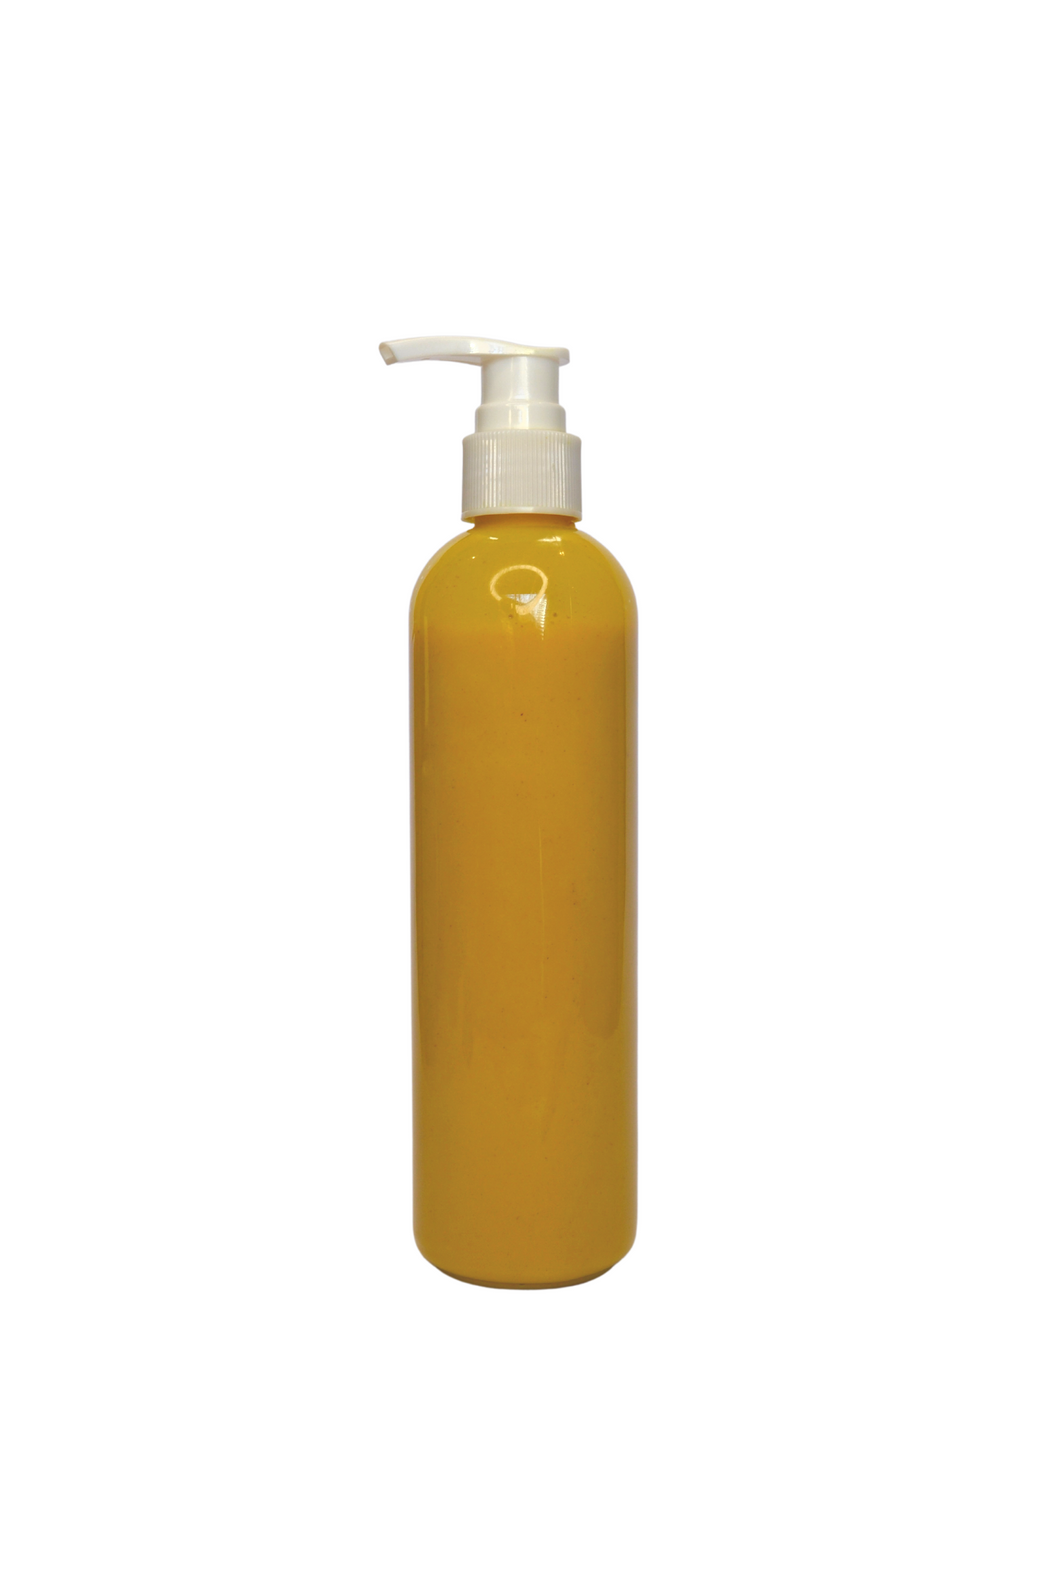 Turmeric and carrot shower gel / body wash for skin brightening